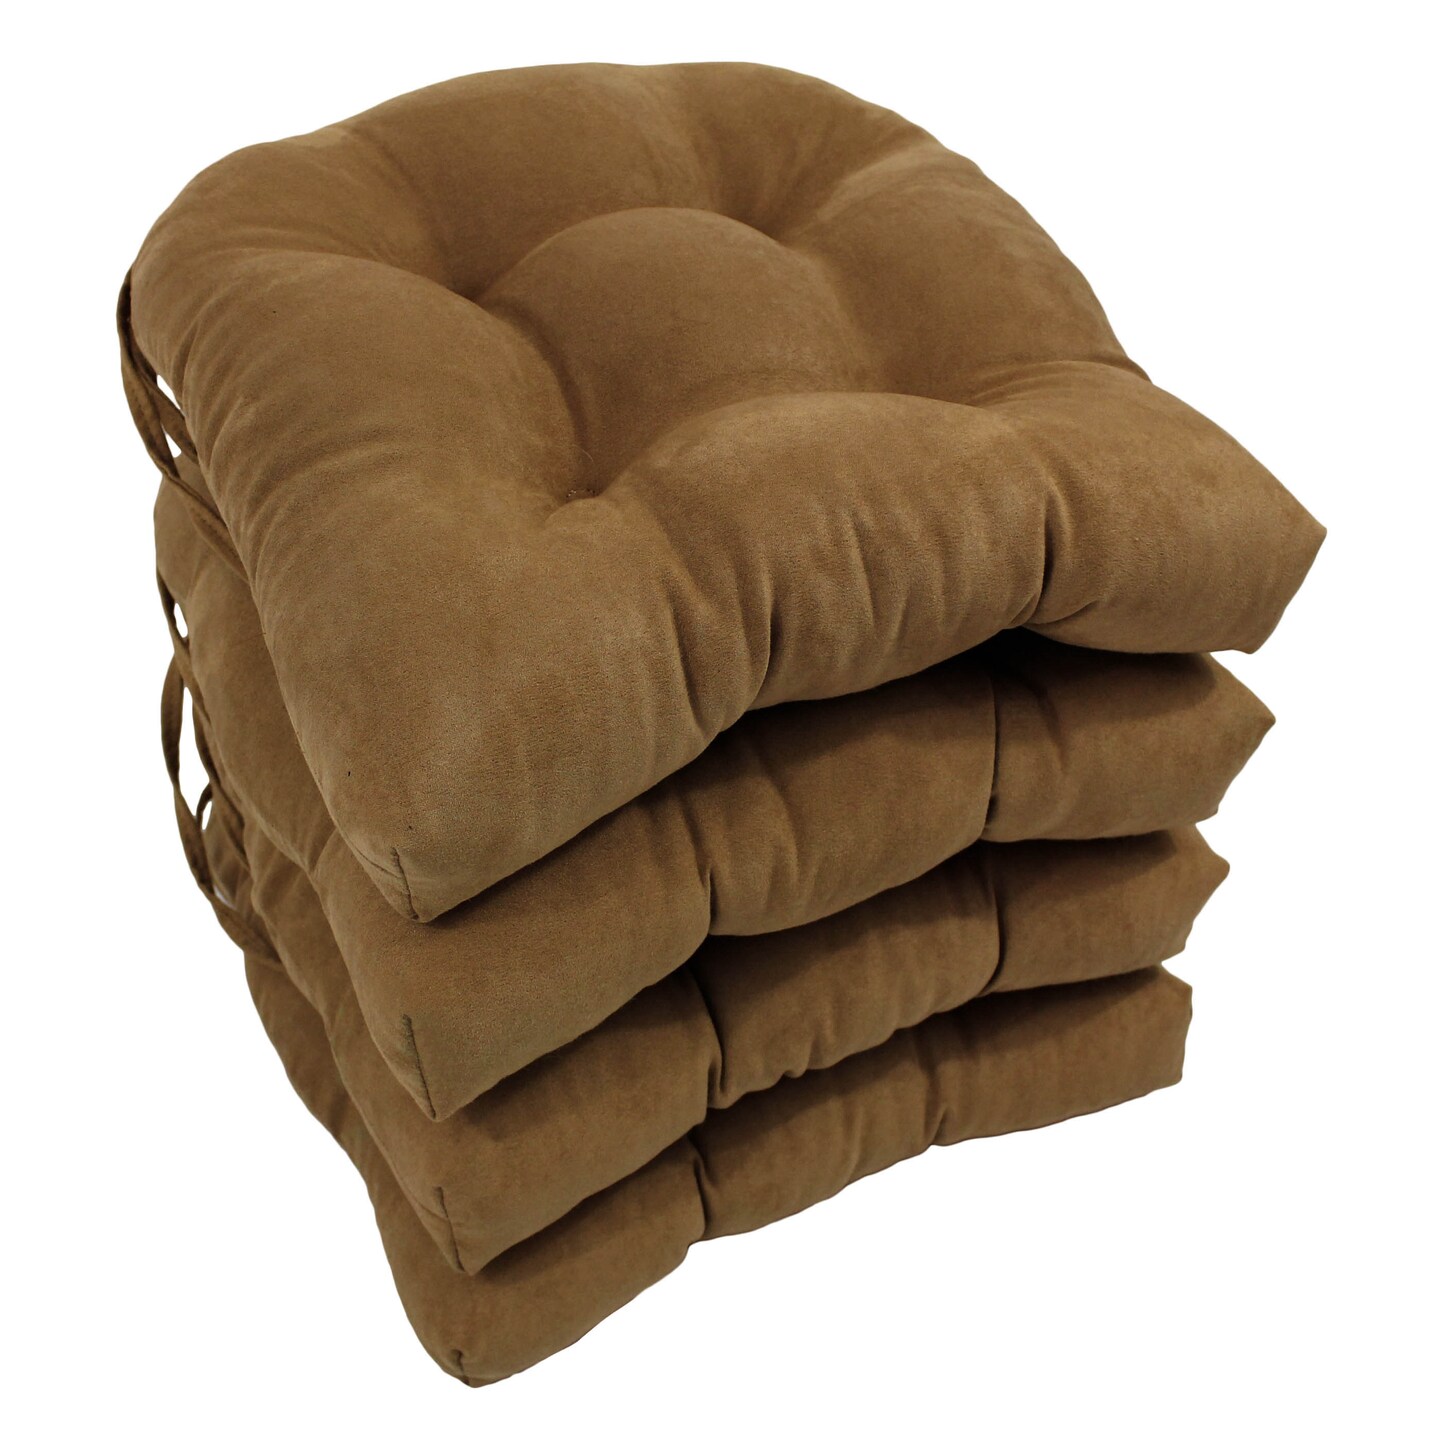 16-inch Solid Micro Suede U-shaped Tufted Chair Cushions (Set of 4) -  Saddle Brown